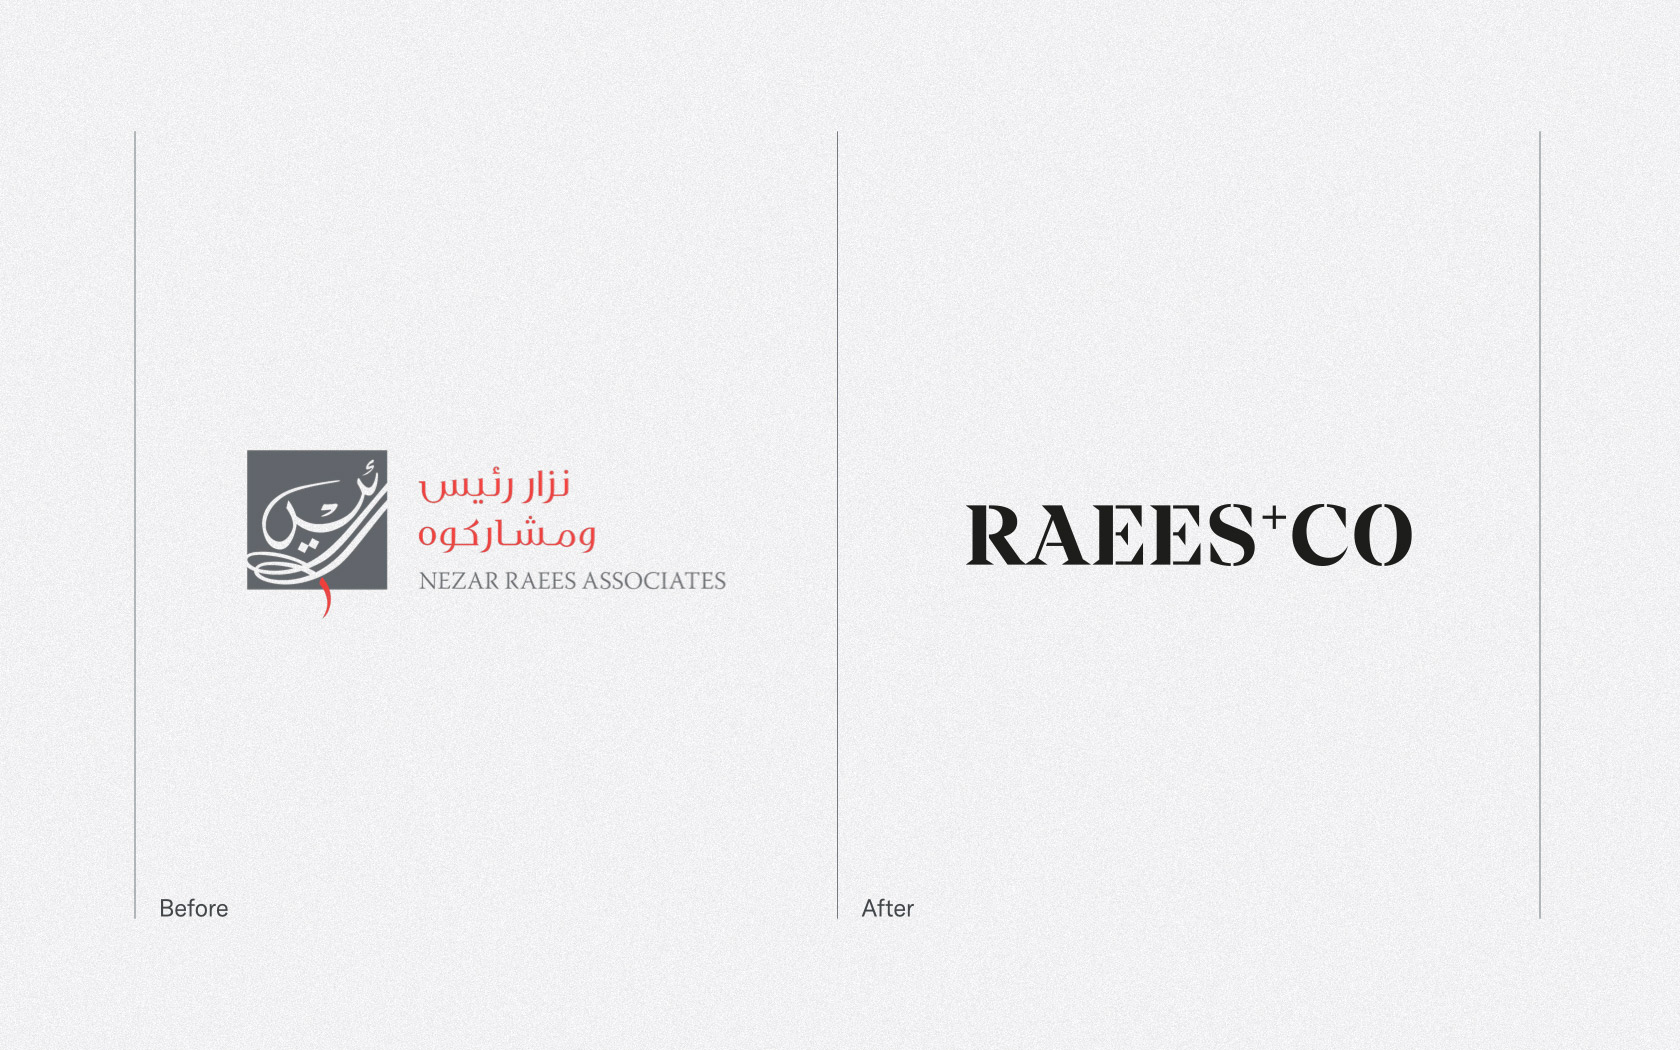 Rates & Co. Previous and new identity